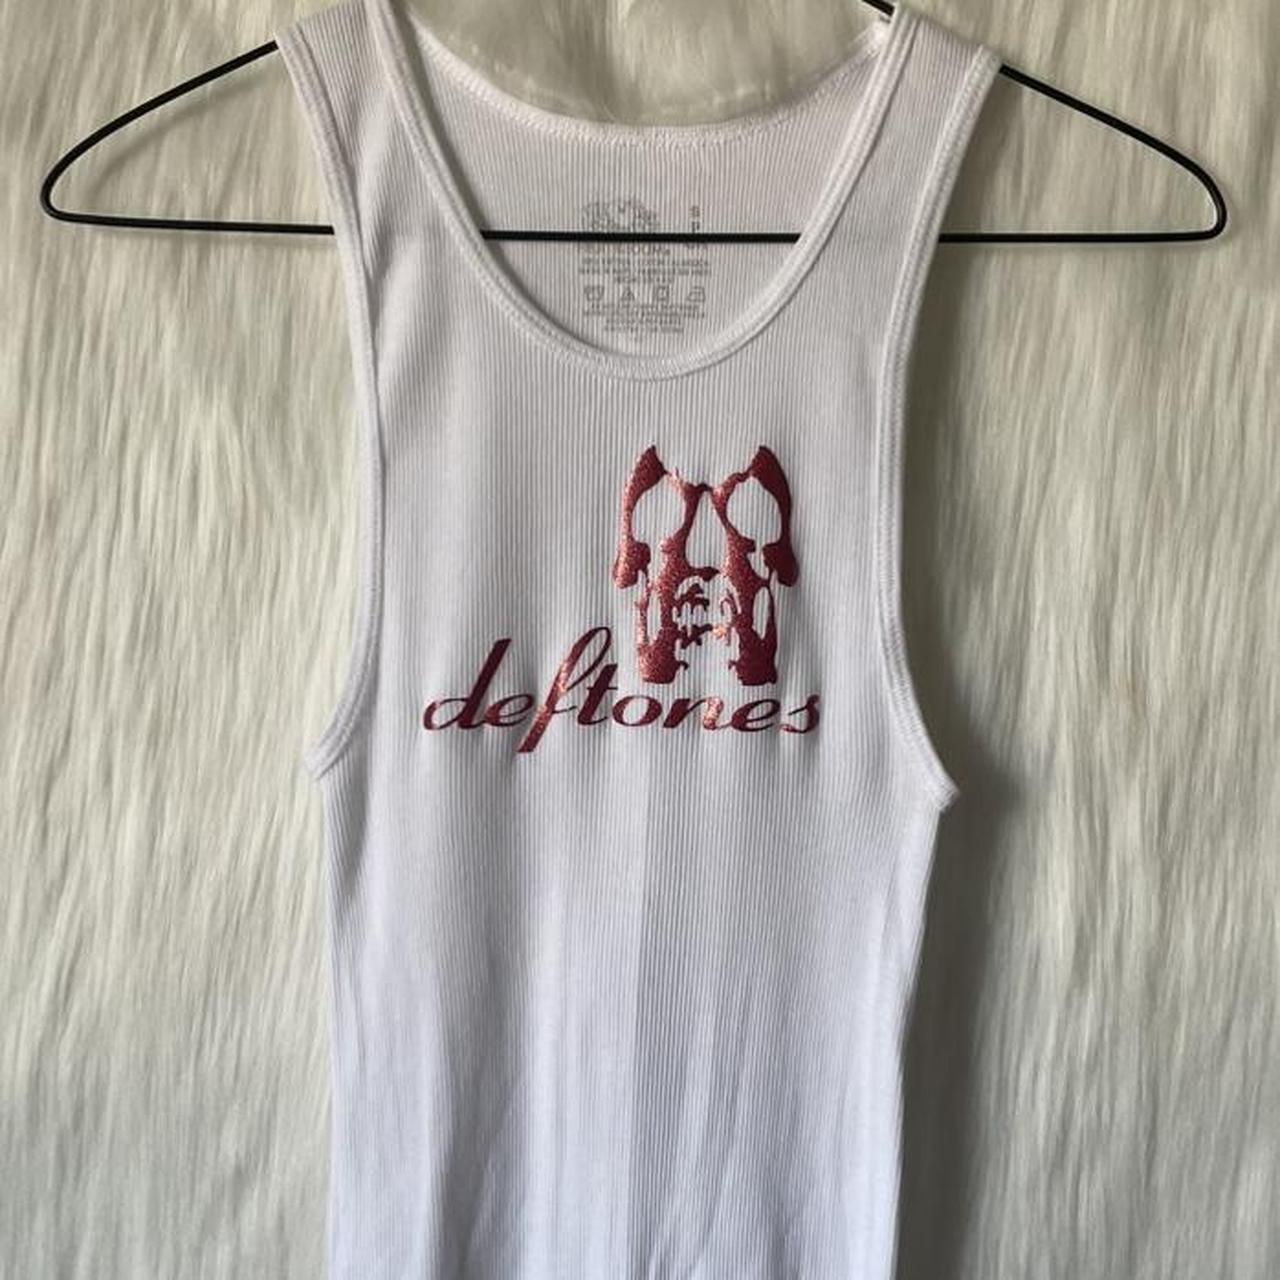 New Hello Kitty Devil Tank Top Comfortable stretchy - Depop